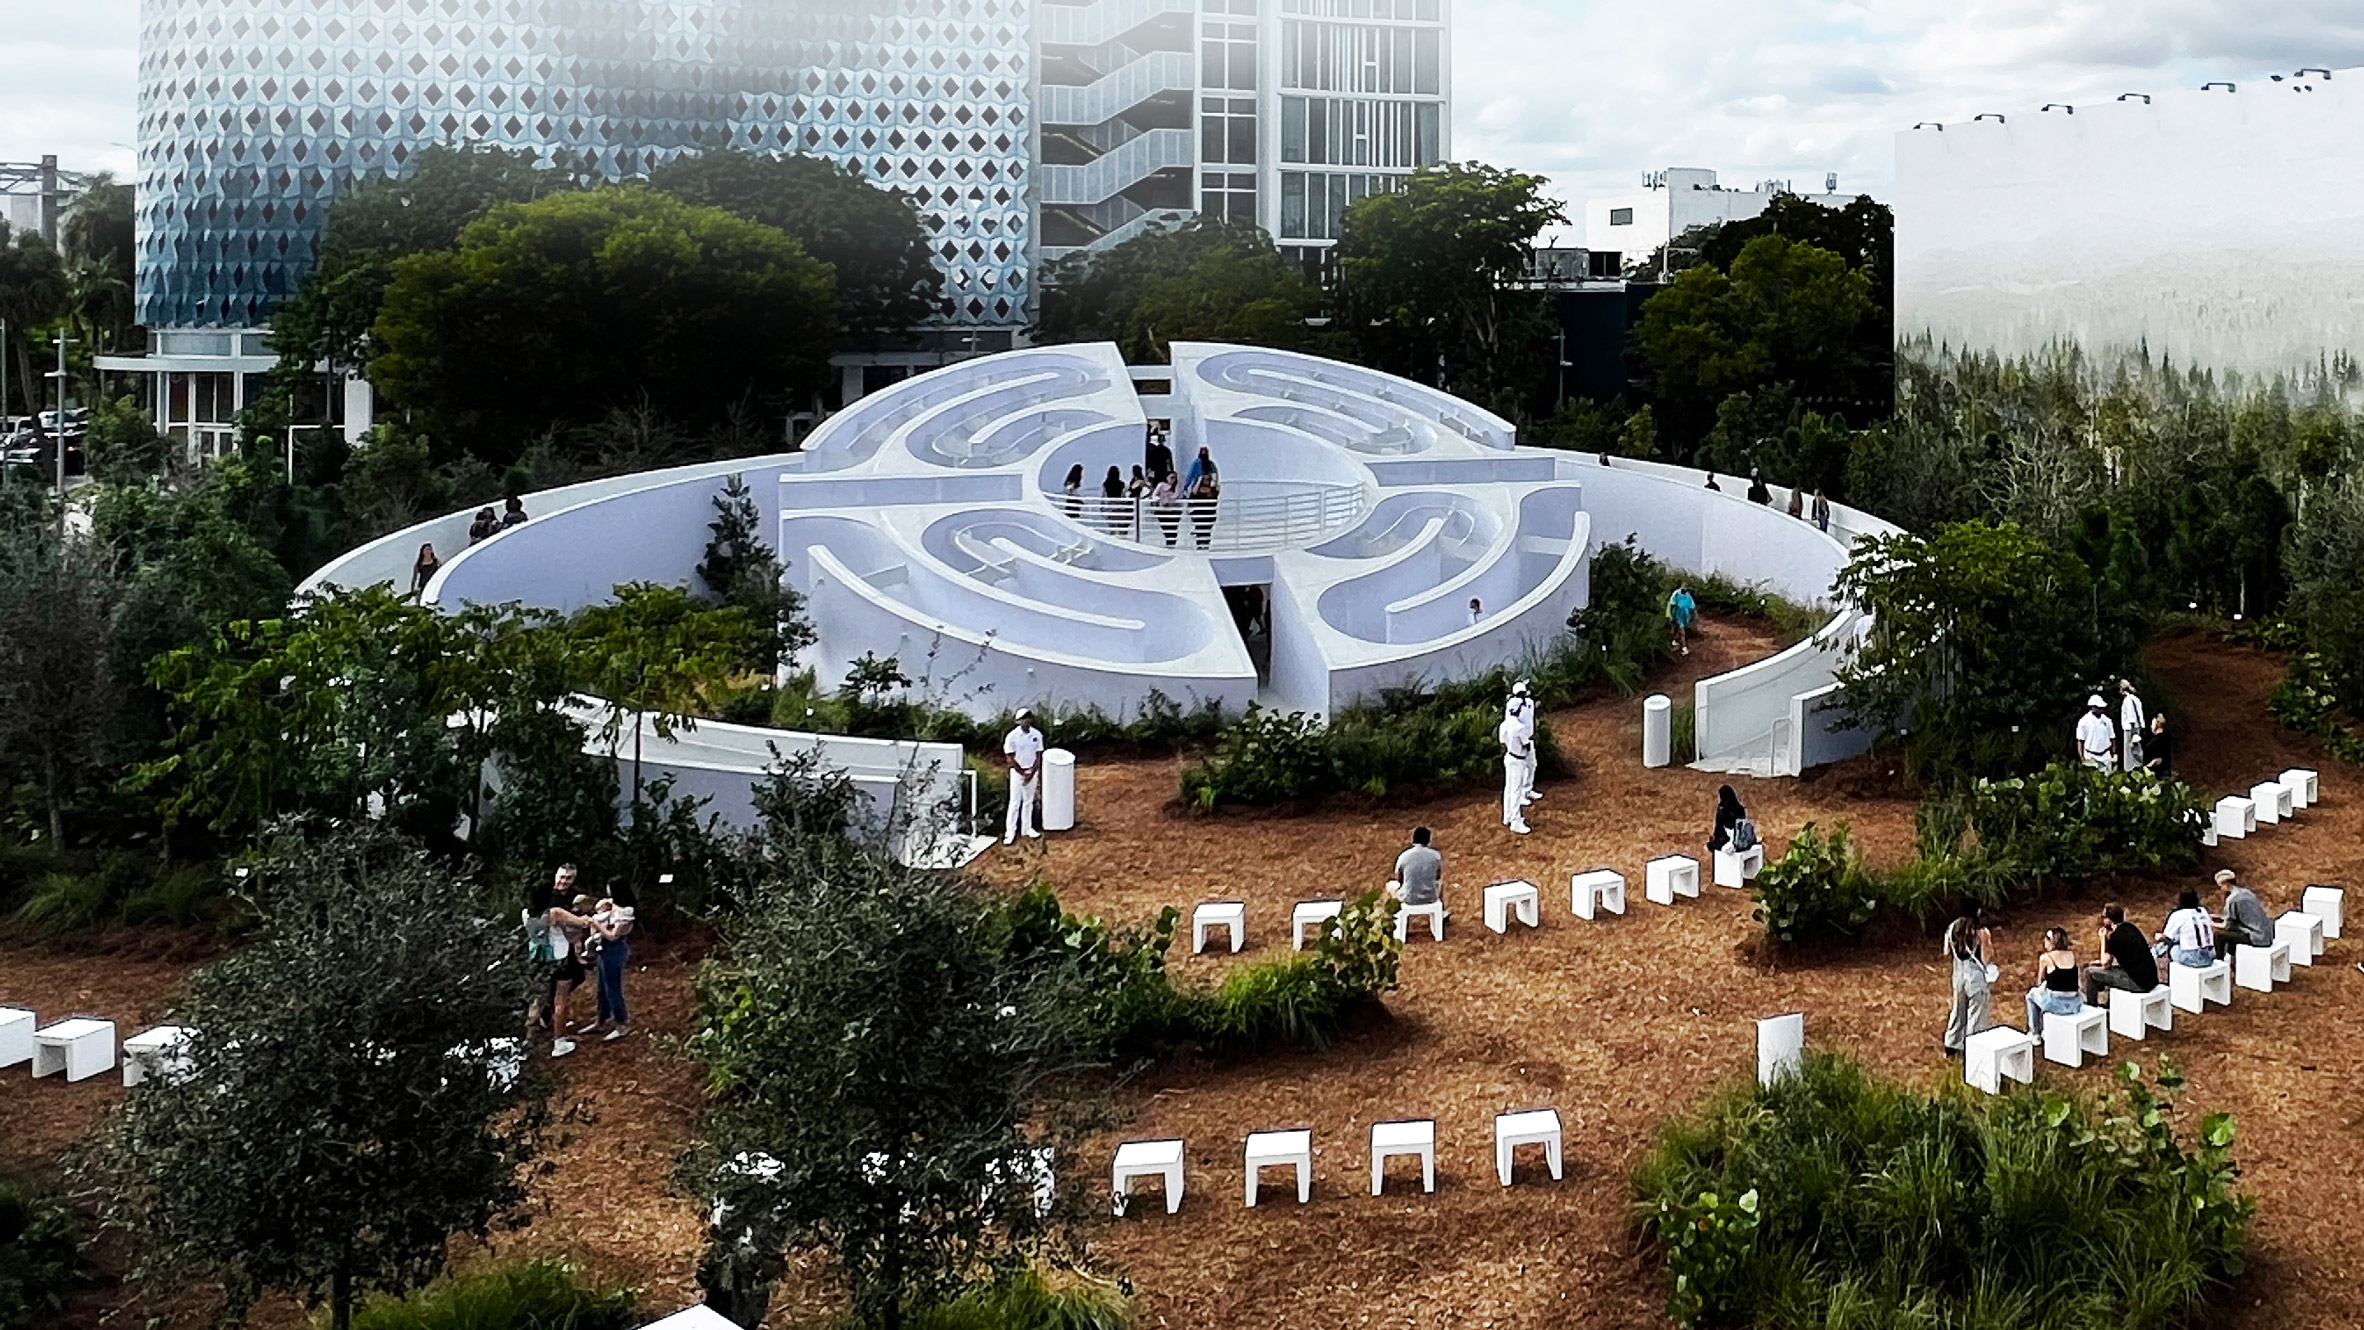 A Giant PopUp Labyrinth  Forest Has Taken Over Design Districts Jungle  Plaza  Secret Miami